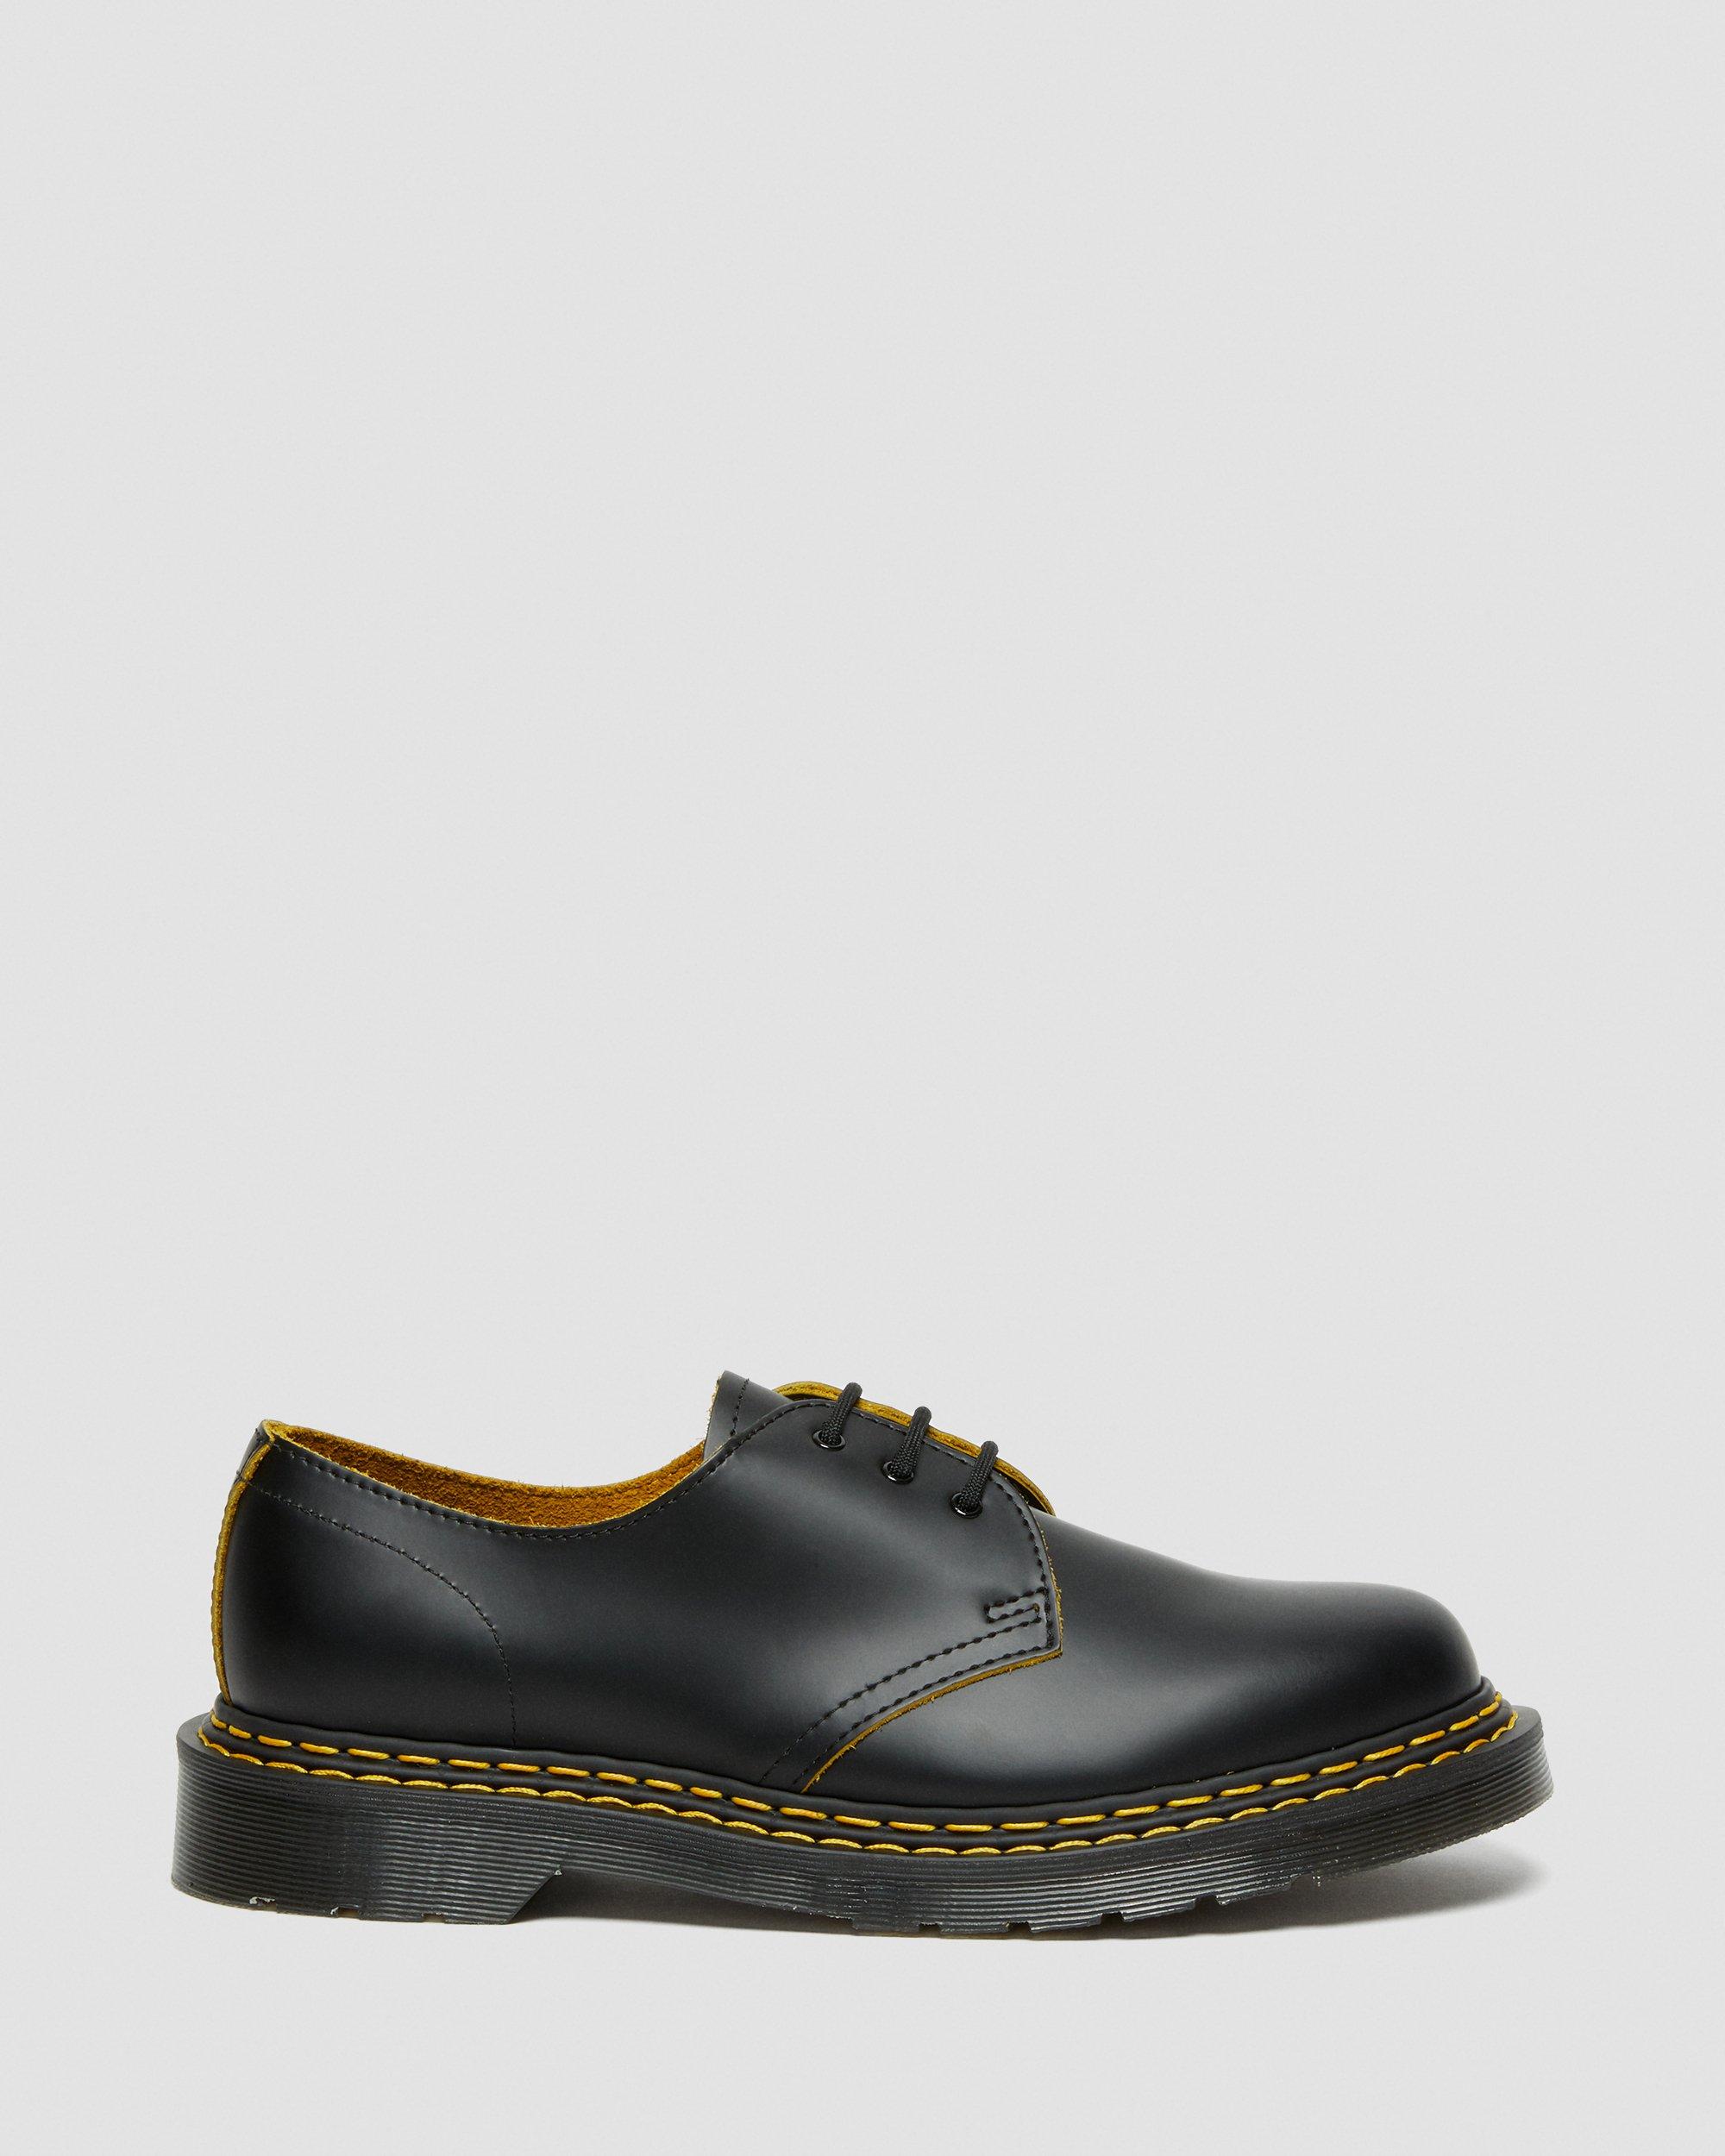 1461 Double Stitch Leather Oxford Shoes in Black | Dr. Martens